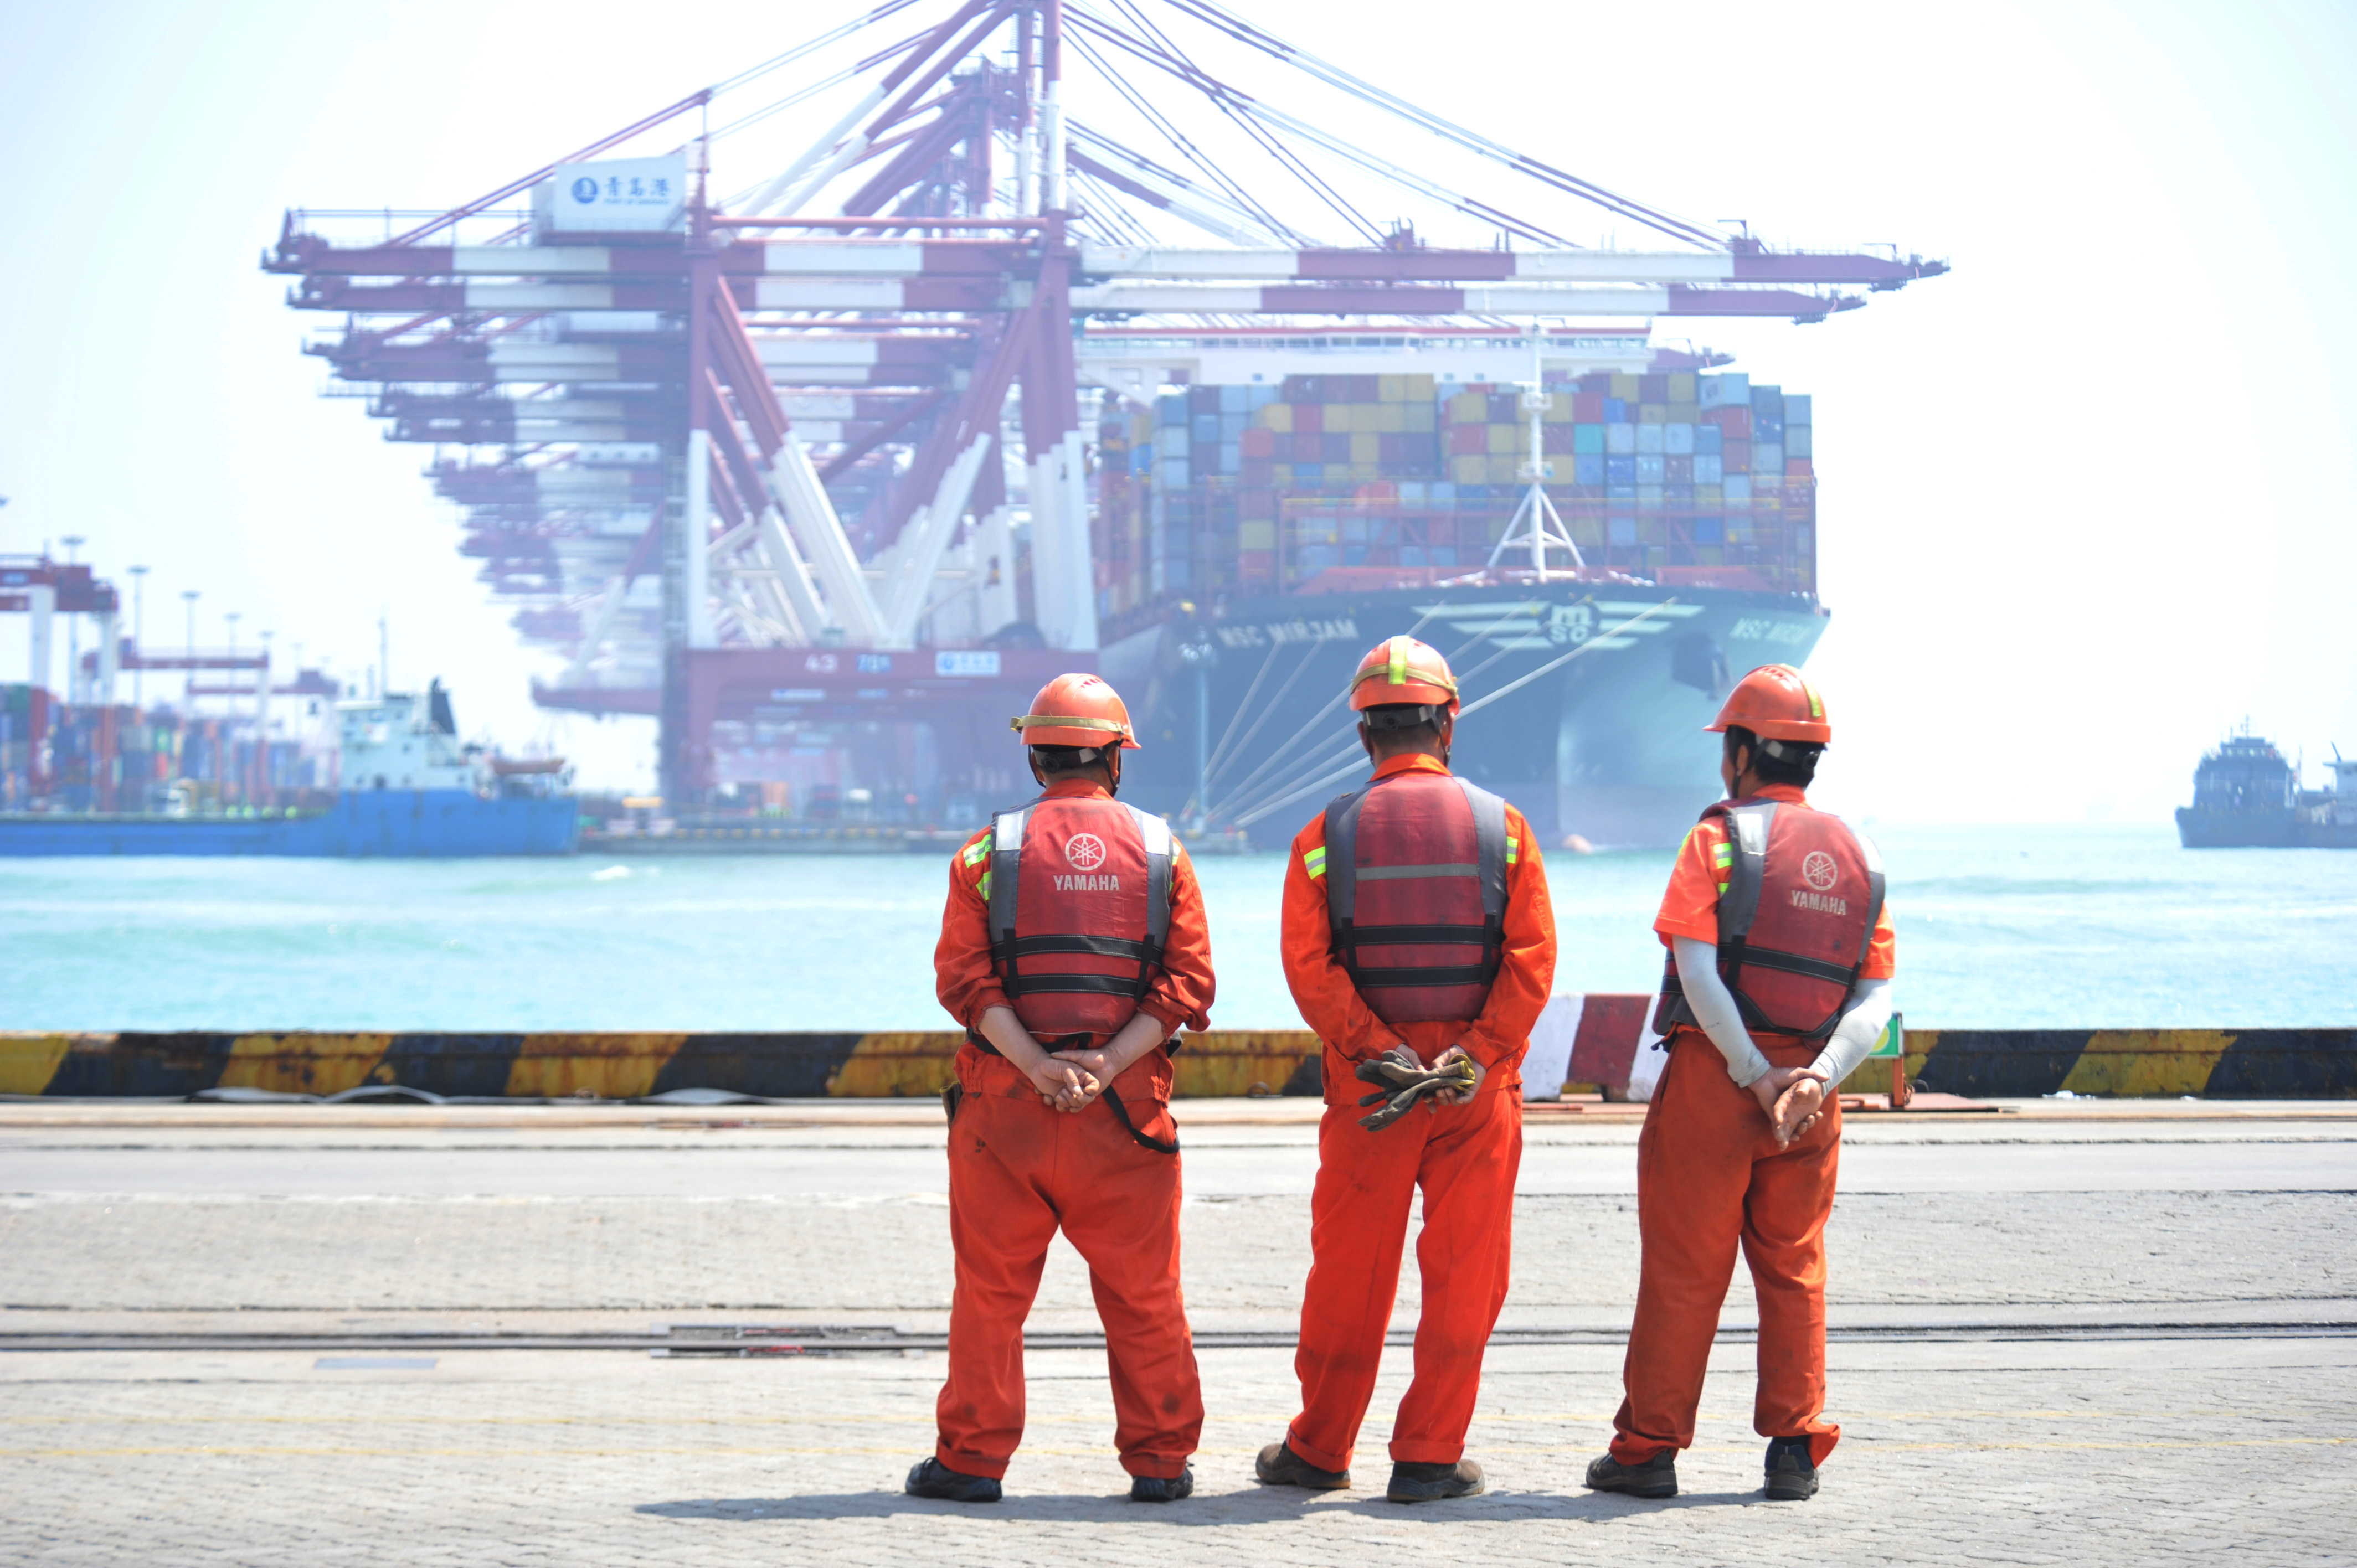 Workers stand at the port of Qingdao, Shandong